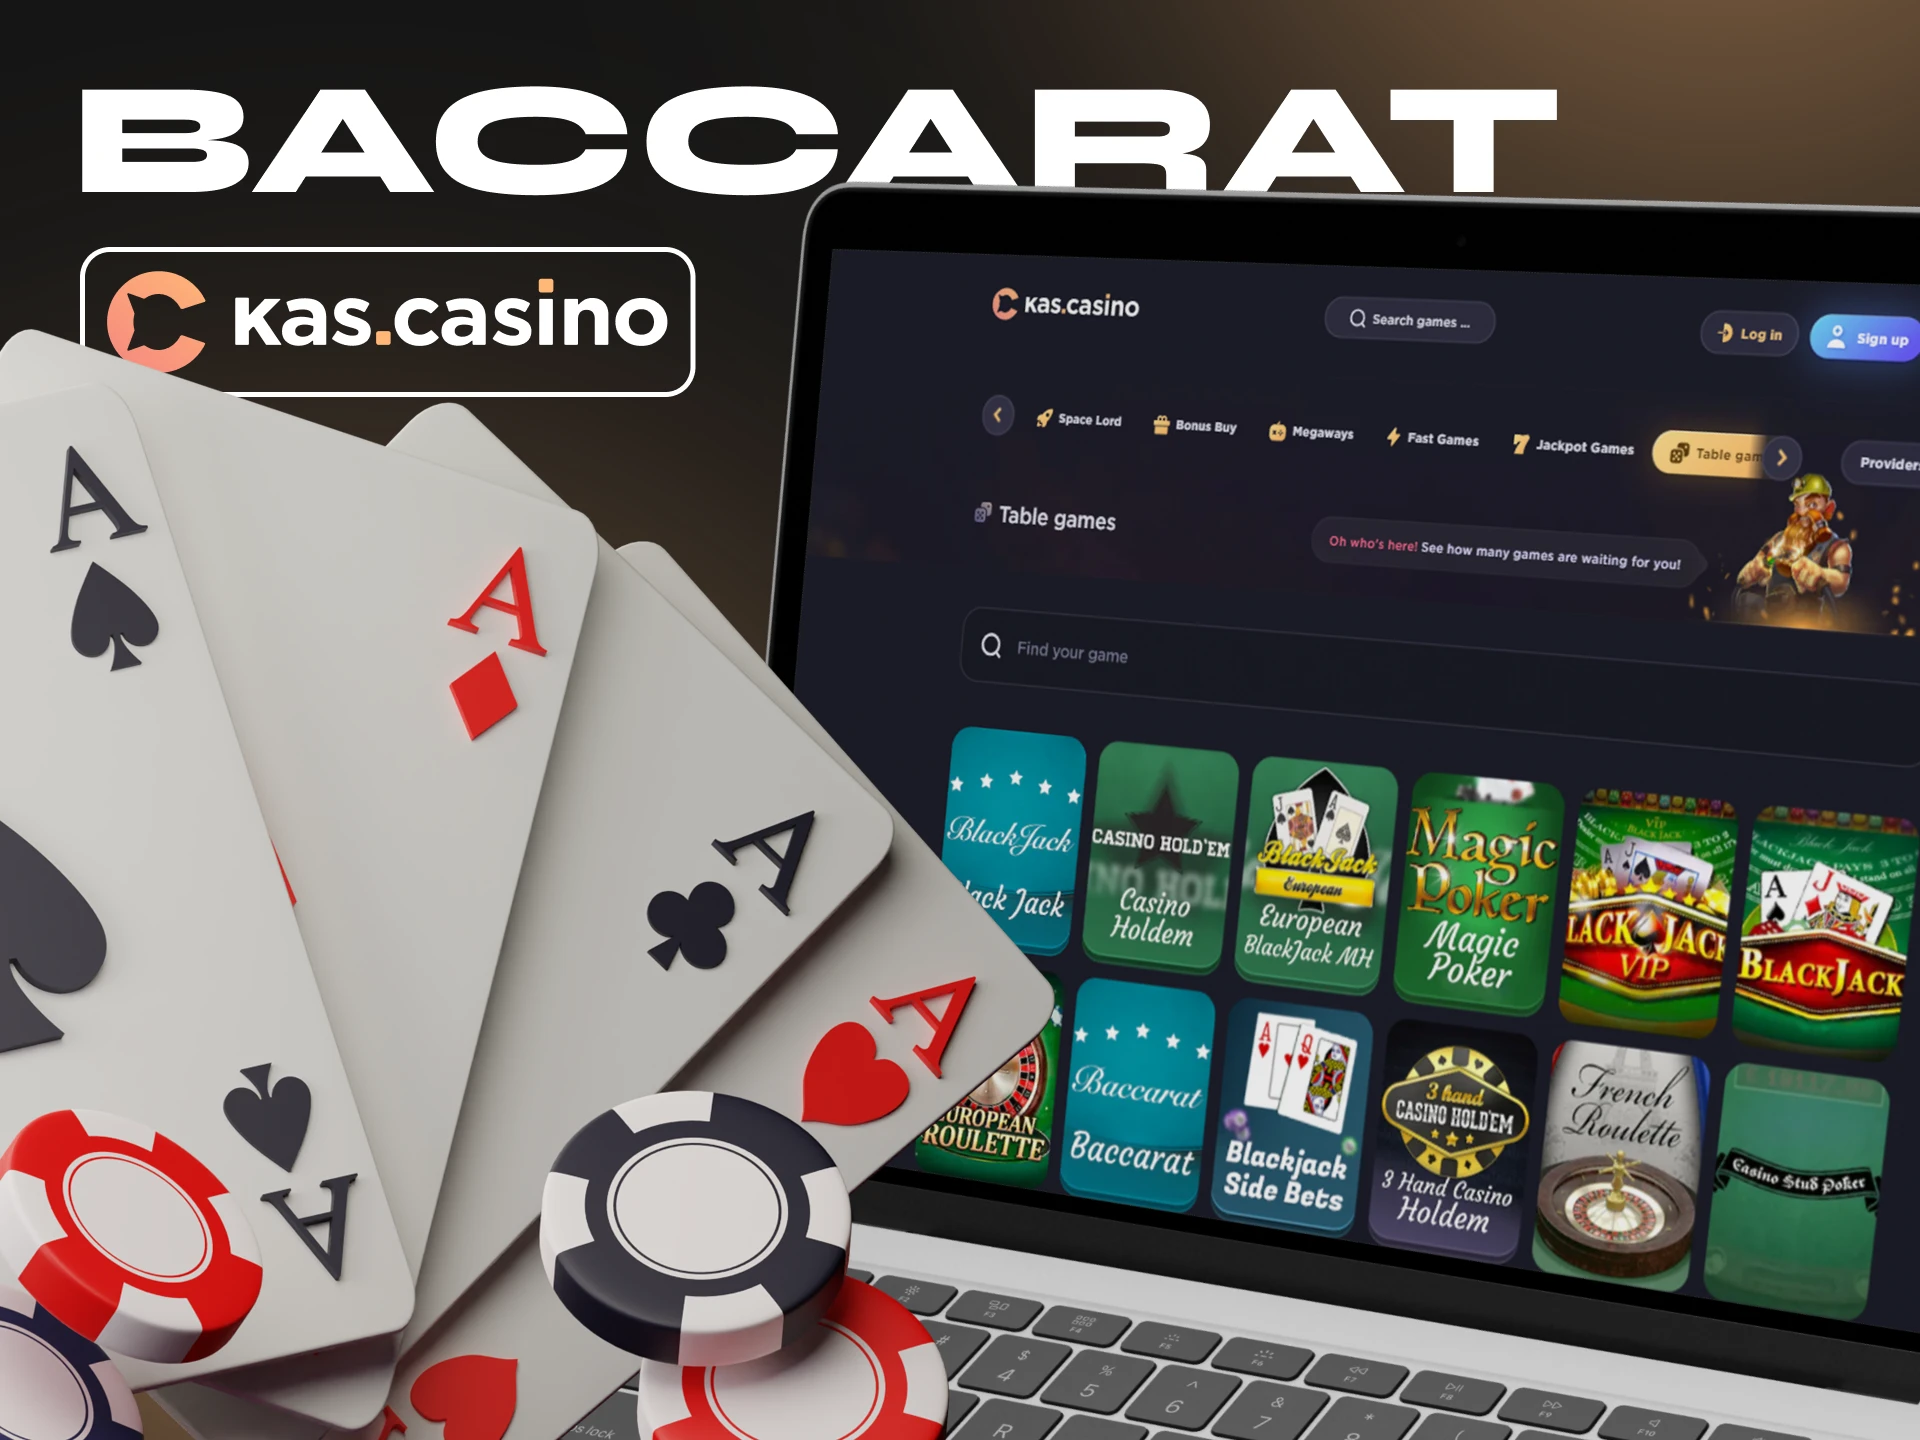 At Kas Casino you will find many variations of the baccarat game.